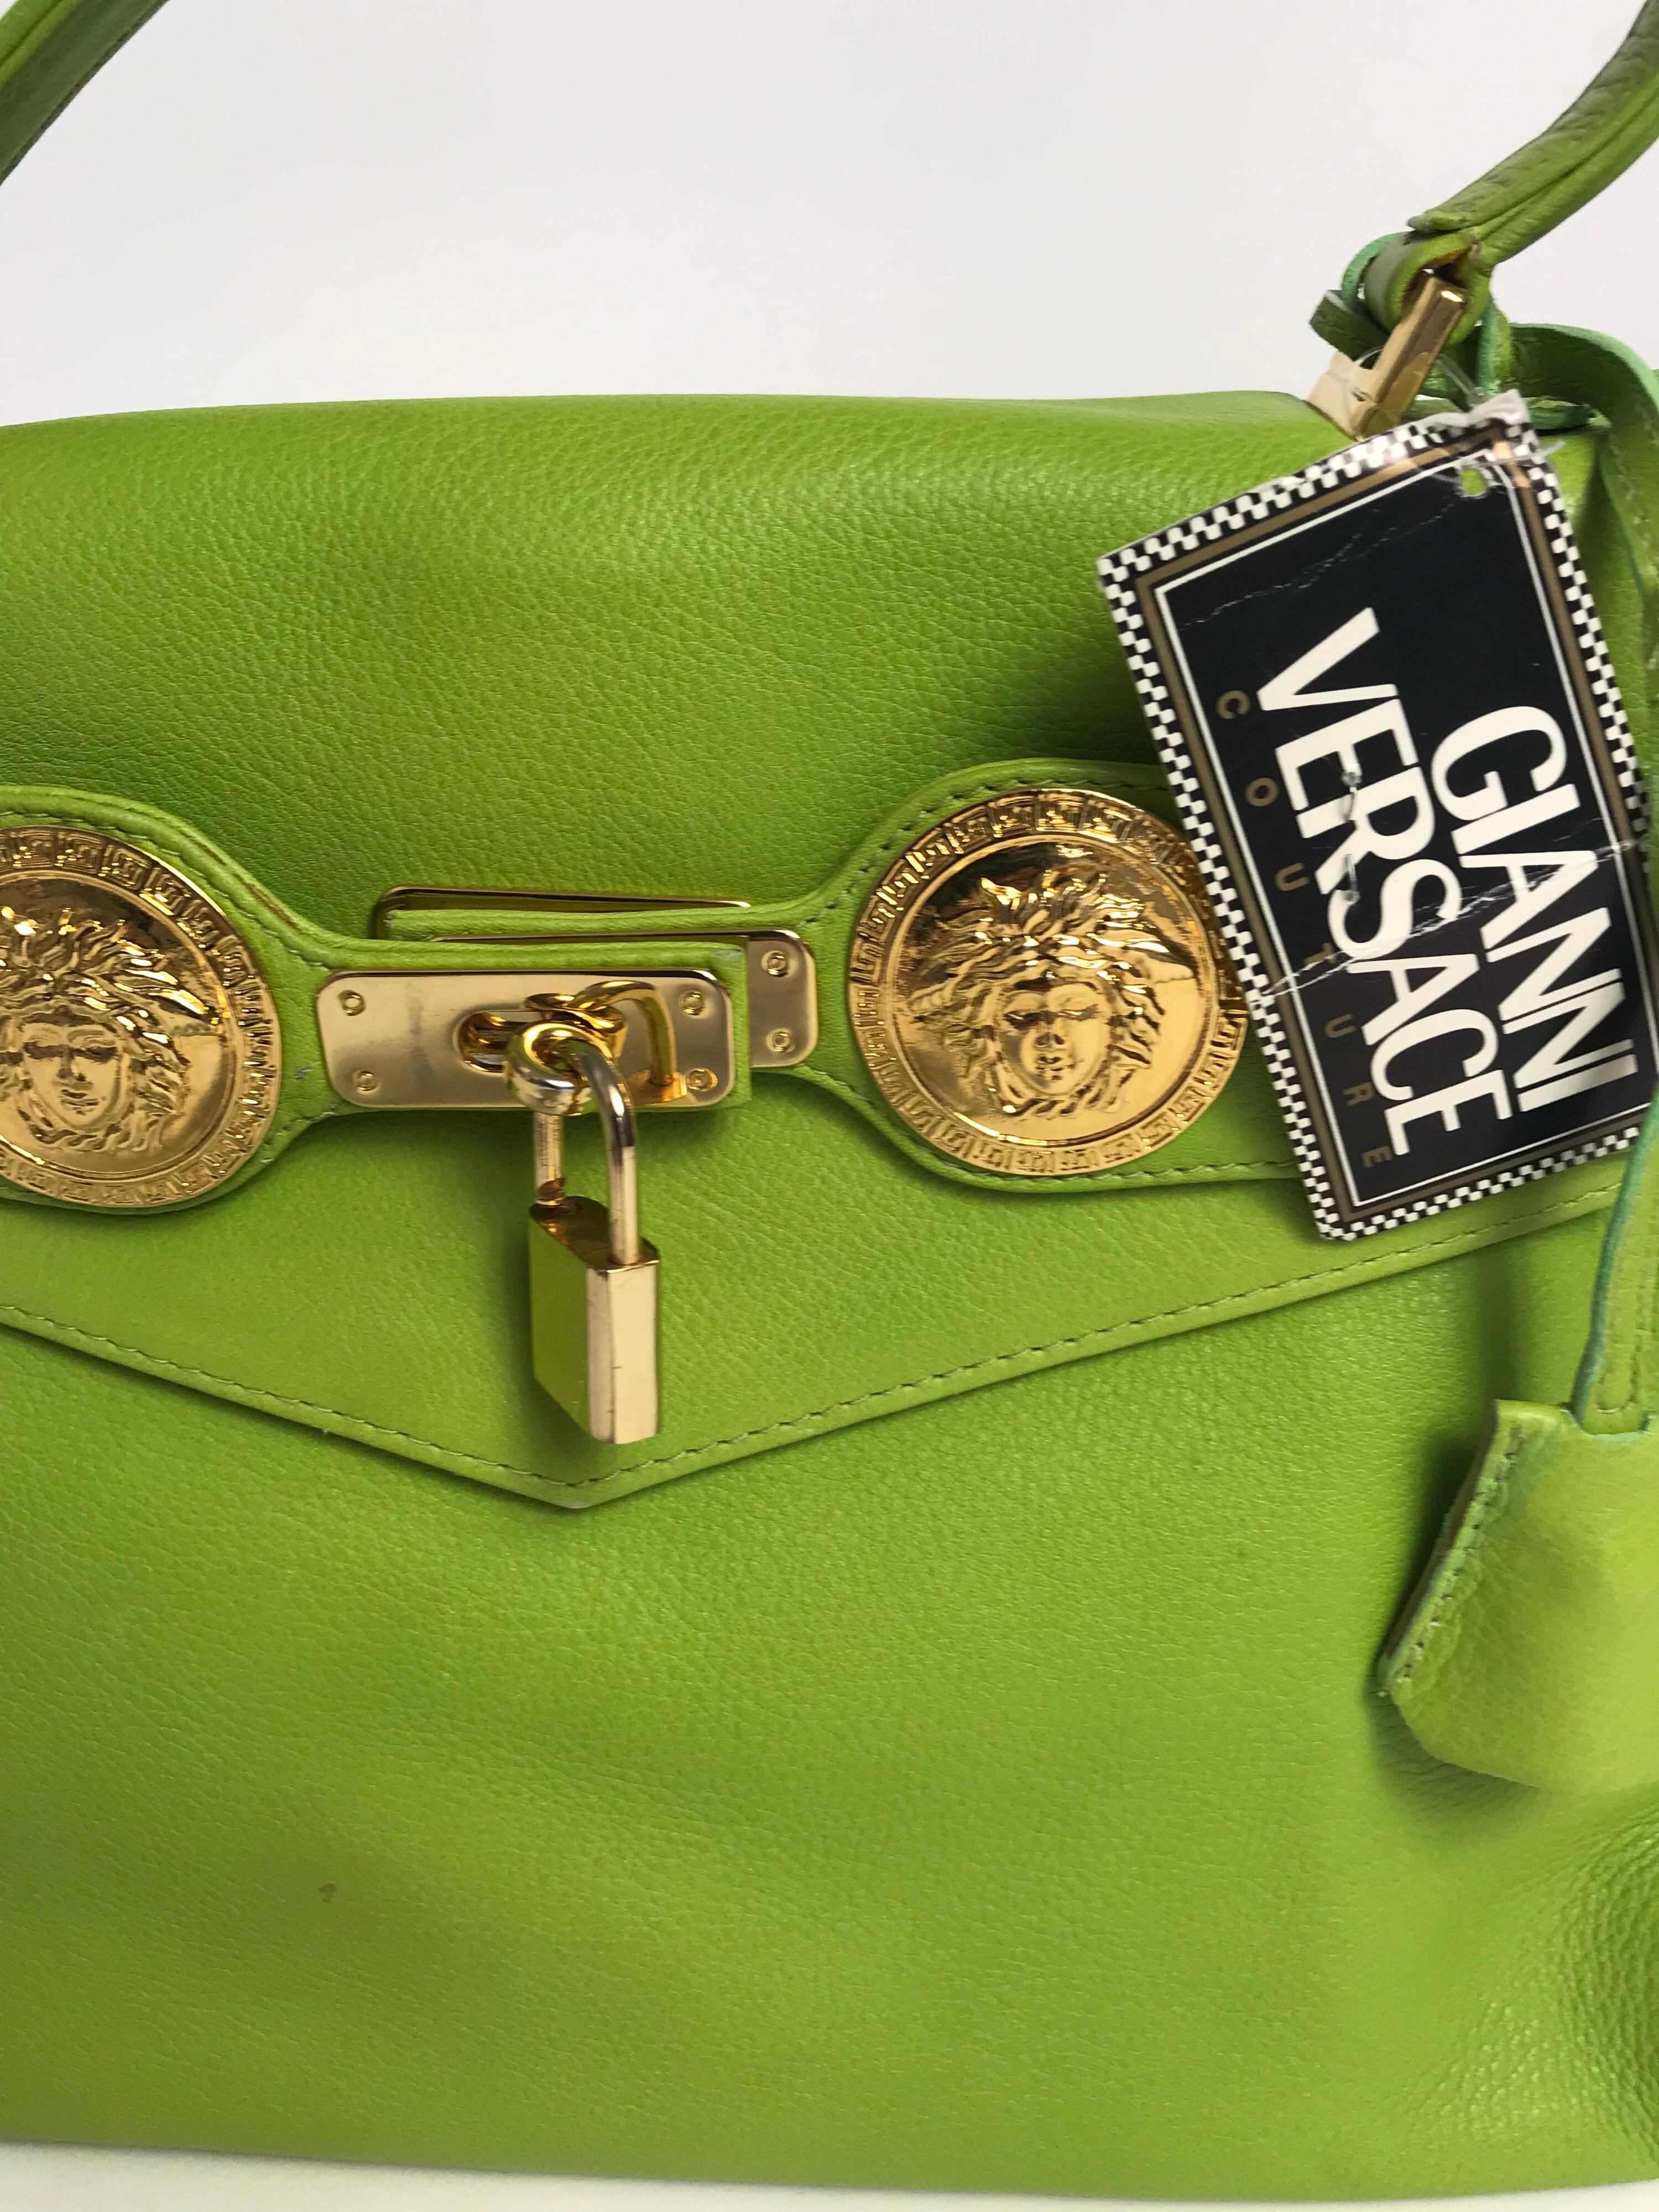 1990s Lime green leather Gianni Versace Kelly bag with gold-tone hardware, top handle and shoulder strap. Medusa embellished belted accents. Lock and key. Includes tag. Condition: very good, small spot on front, see photos. 
12” W x 9” H x 4” D.